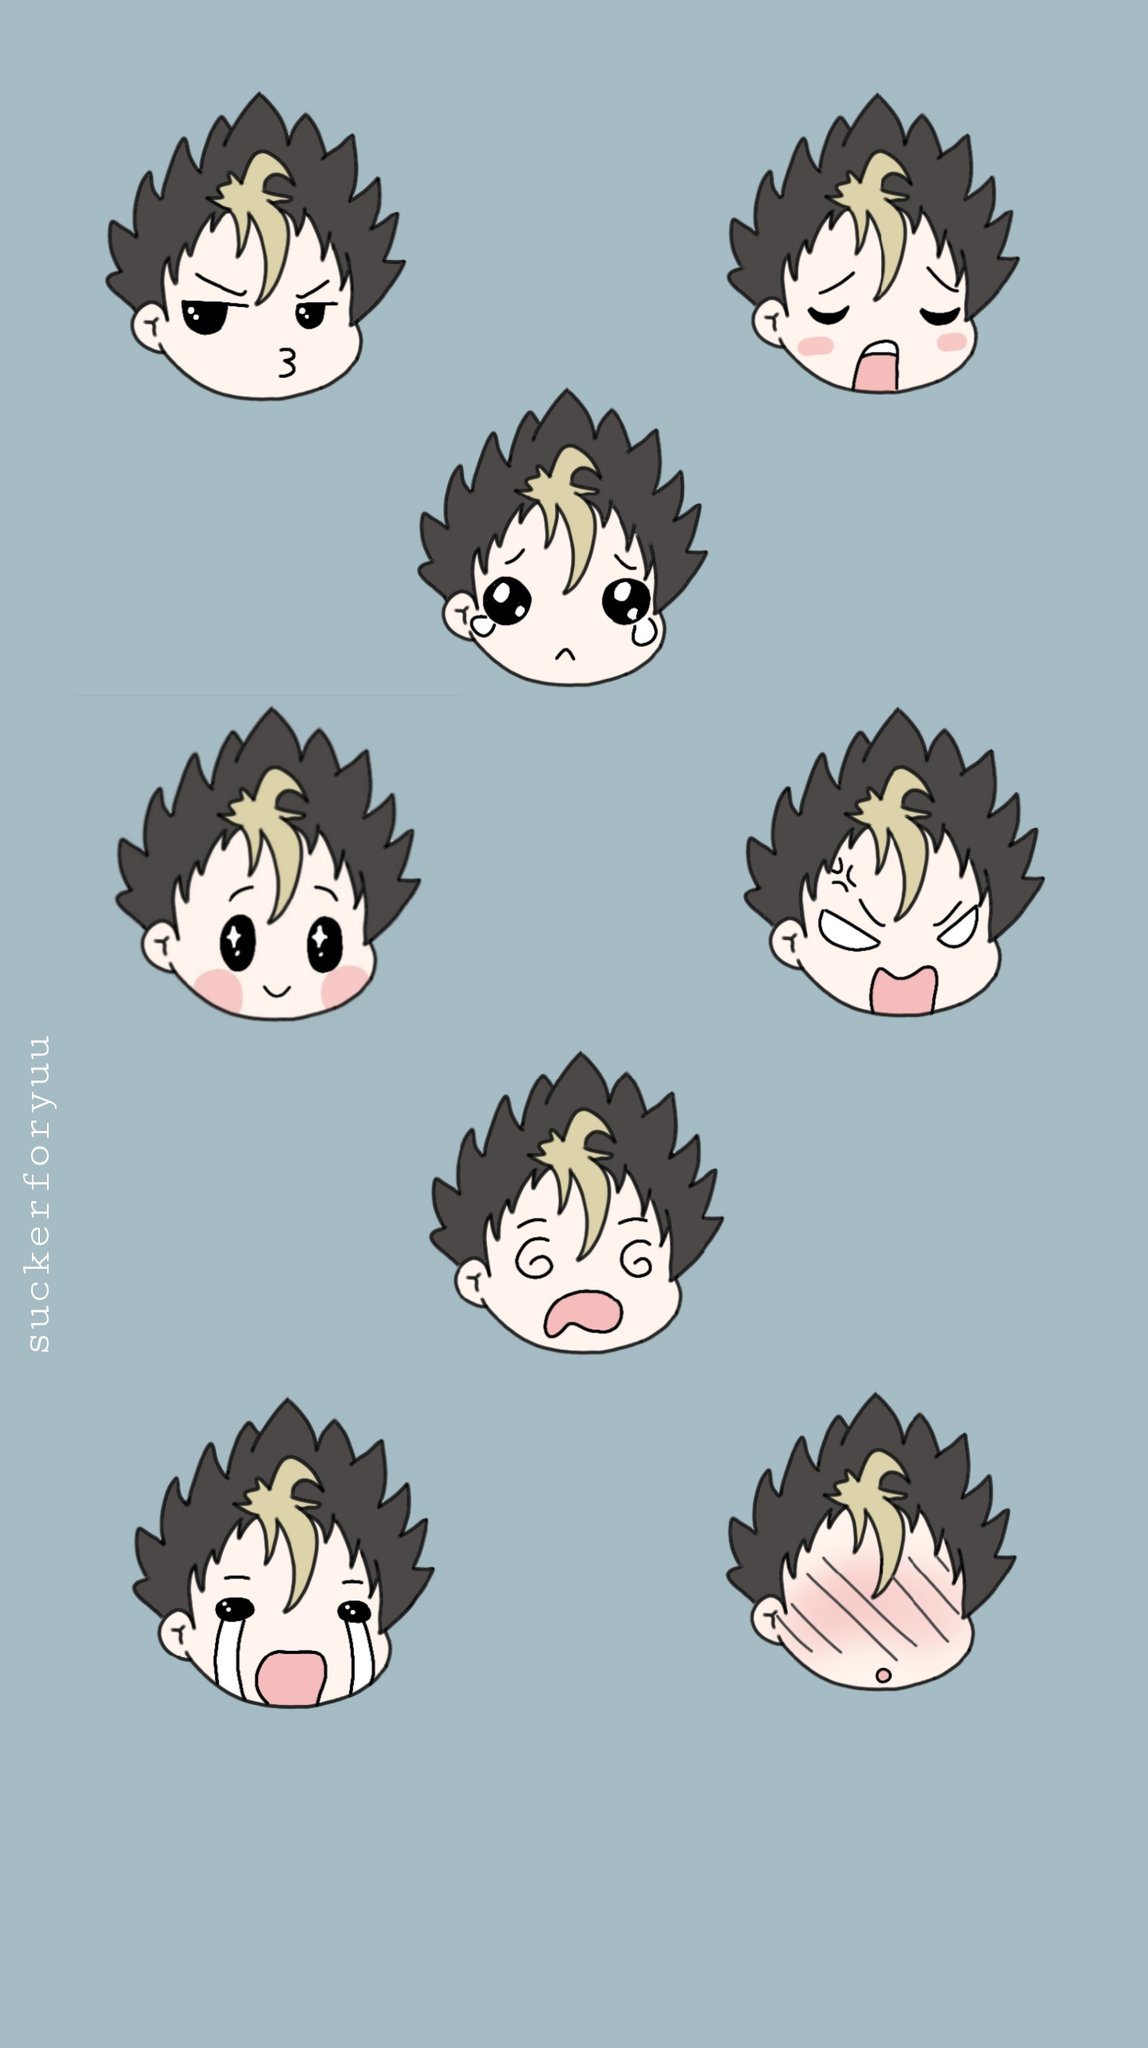 Nishinoya wallpaper you can find more ir my ig avinefromreddit Ill  post those next time dont want to bog the subreddit And sorry forgot  to post last Saturday  rhaikyuu